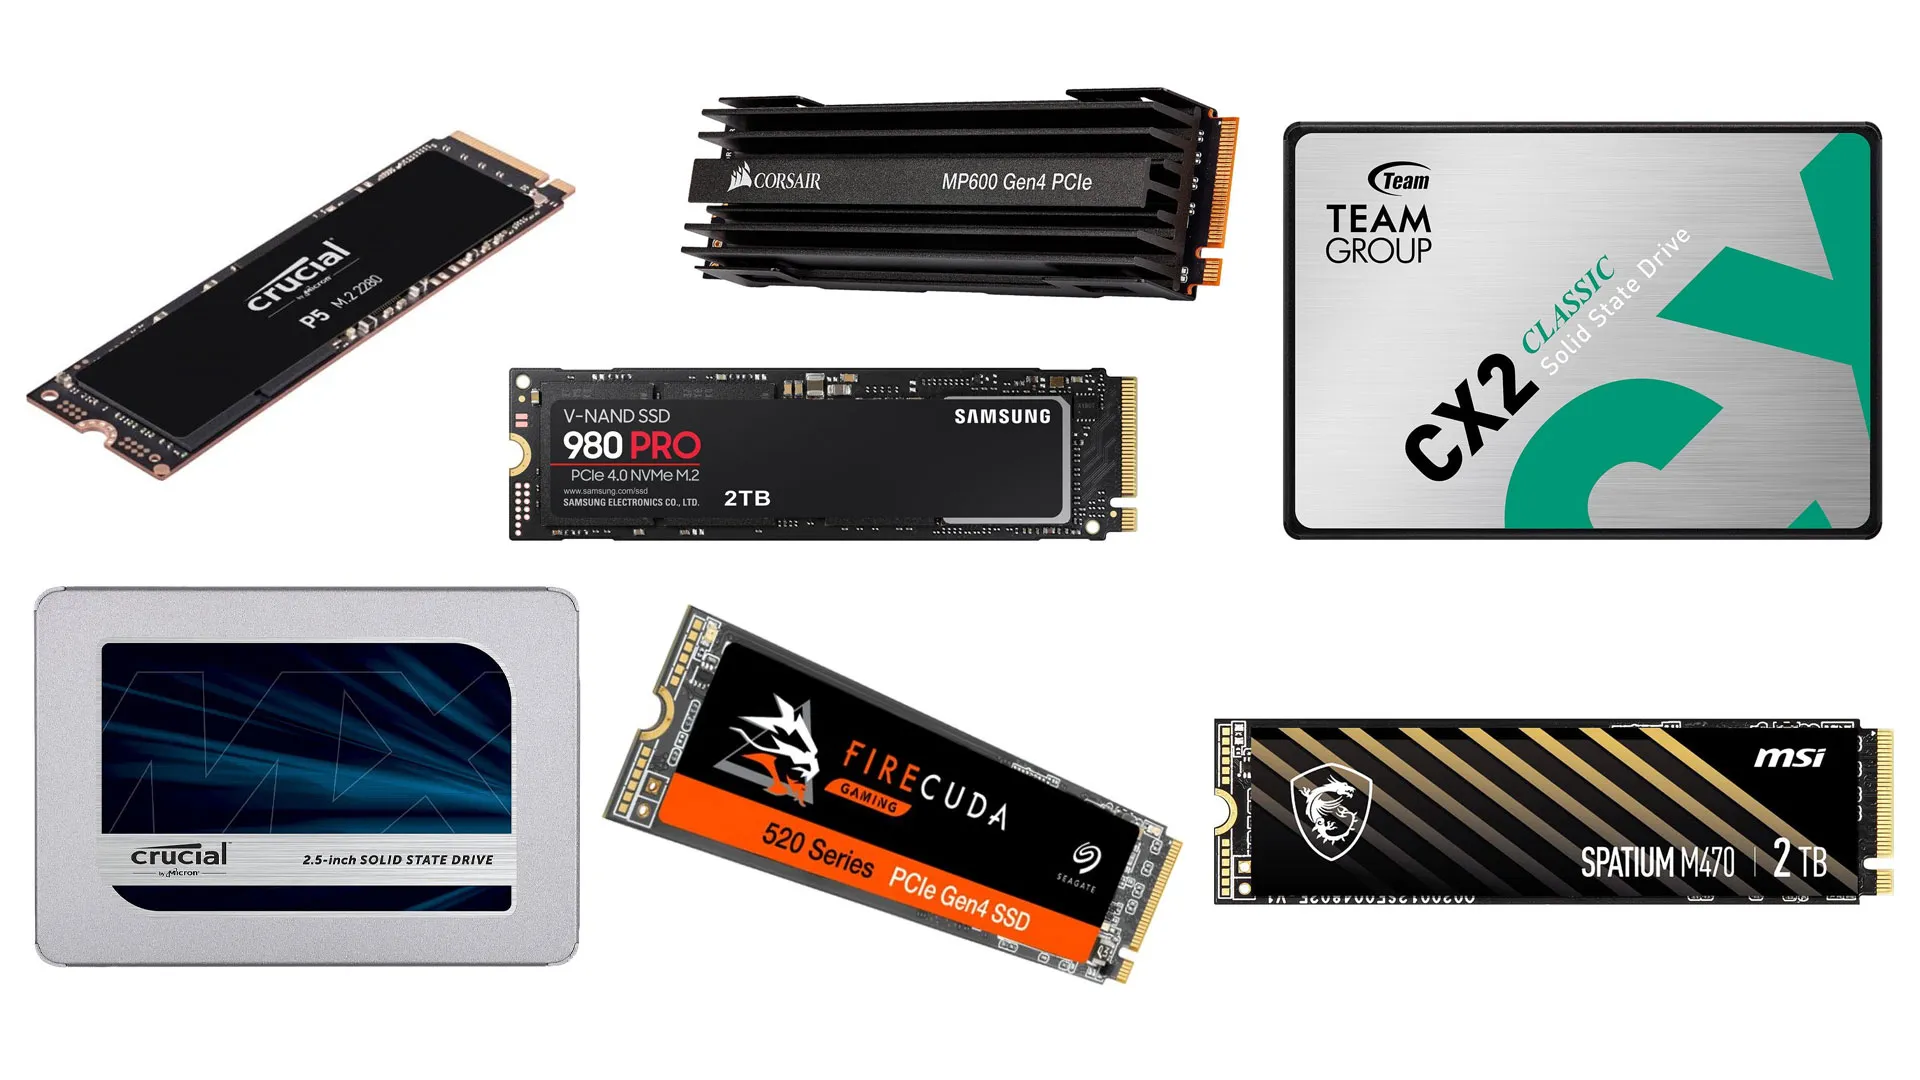 kobling Jet Playful Best SSD deals for PC gaming this Black Friday and Cyber Monday week